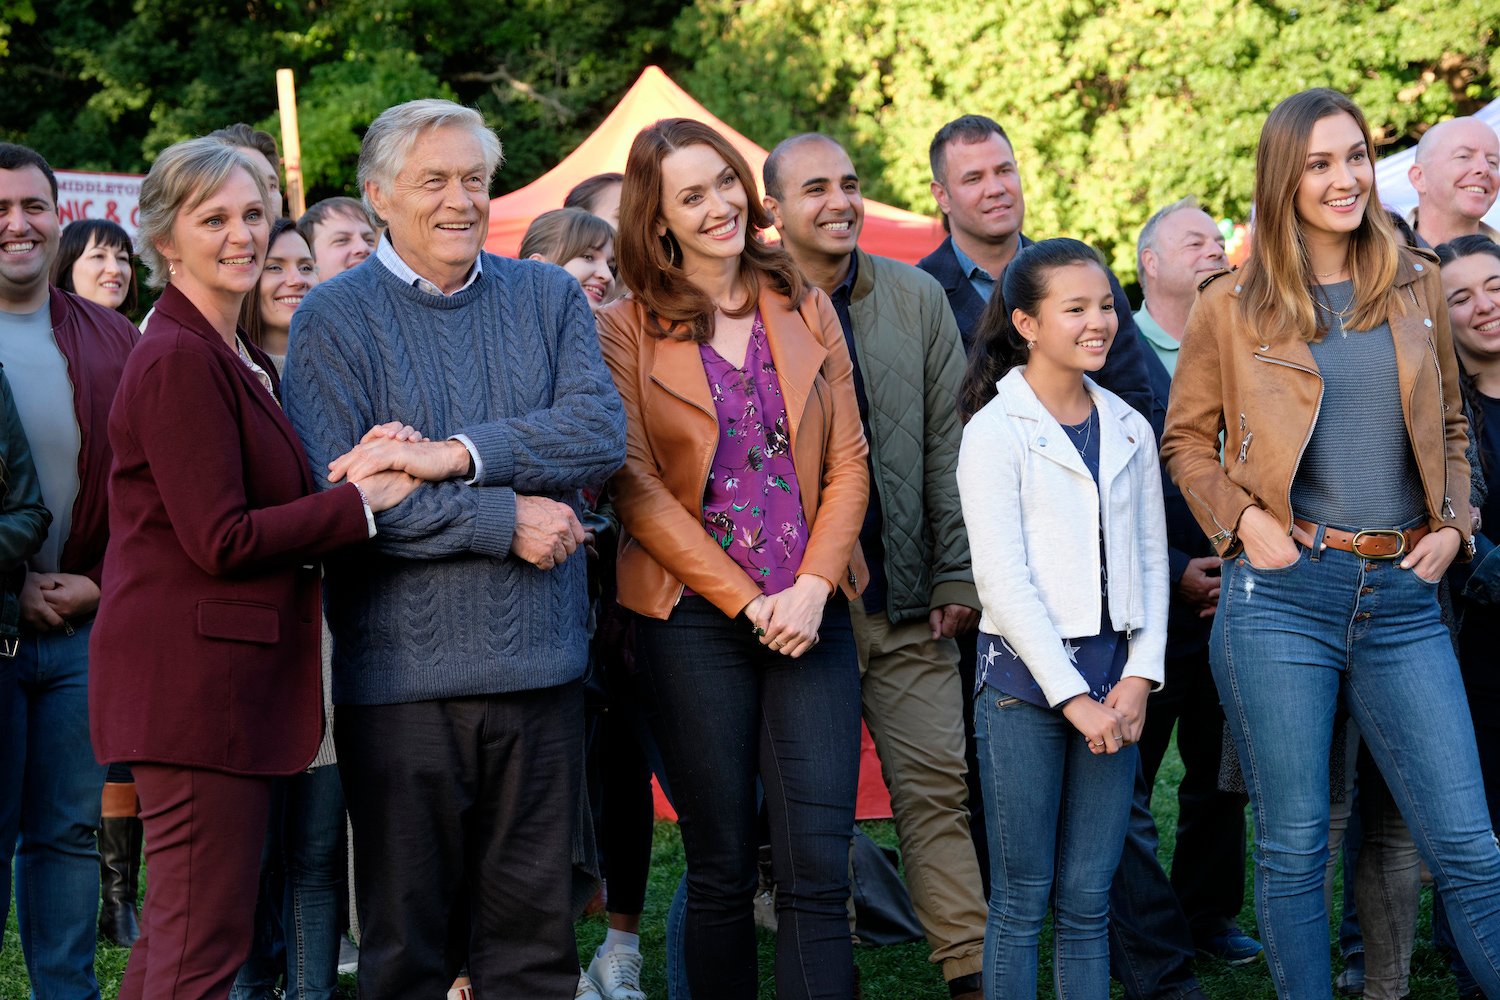 Middleton residents at chili cook-off in a season 6 episode of 'Good Witch' on Hallmark Channel